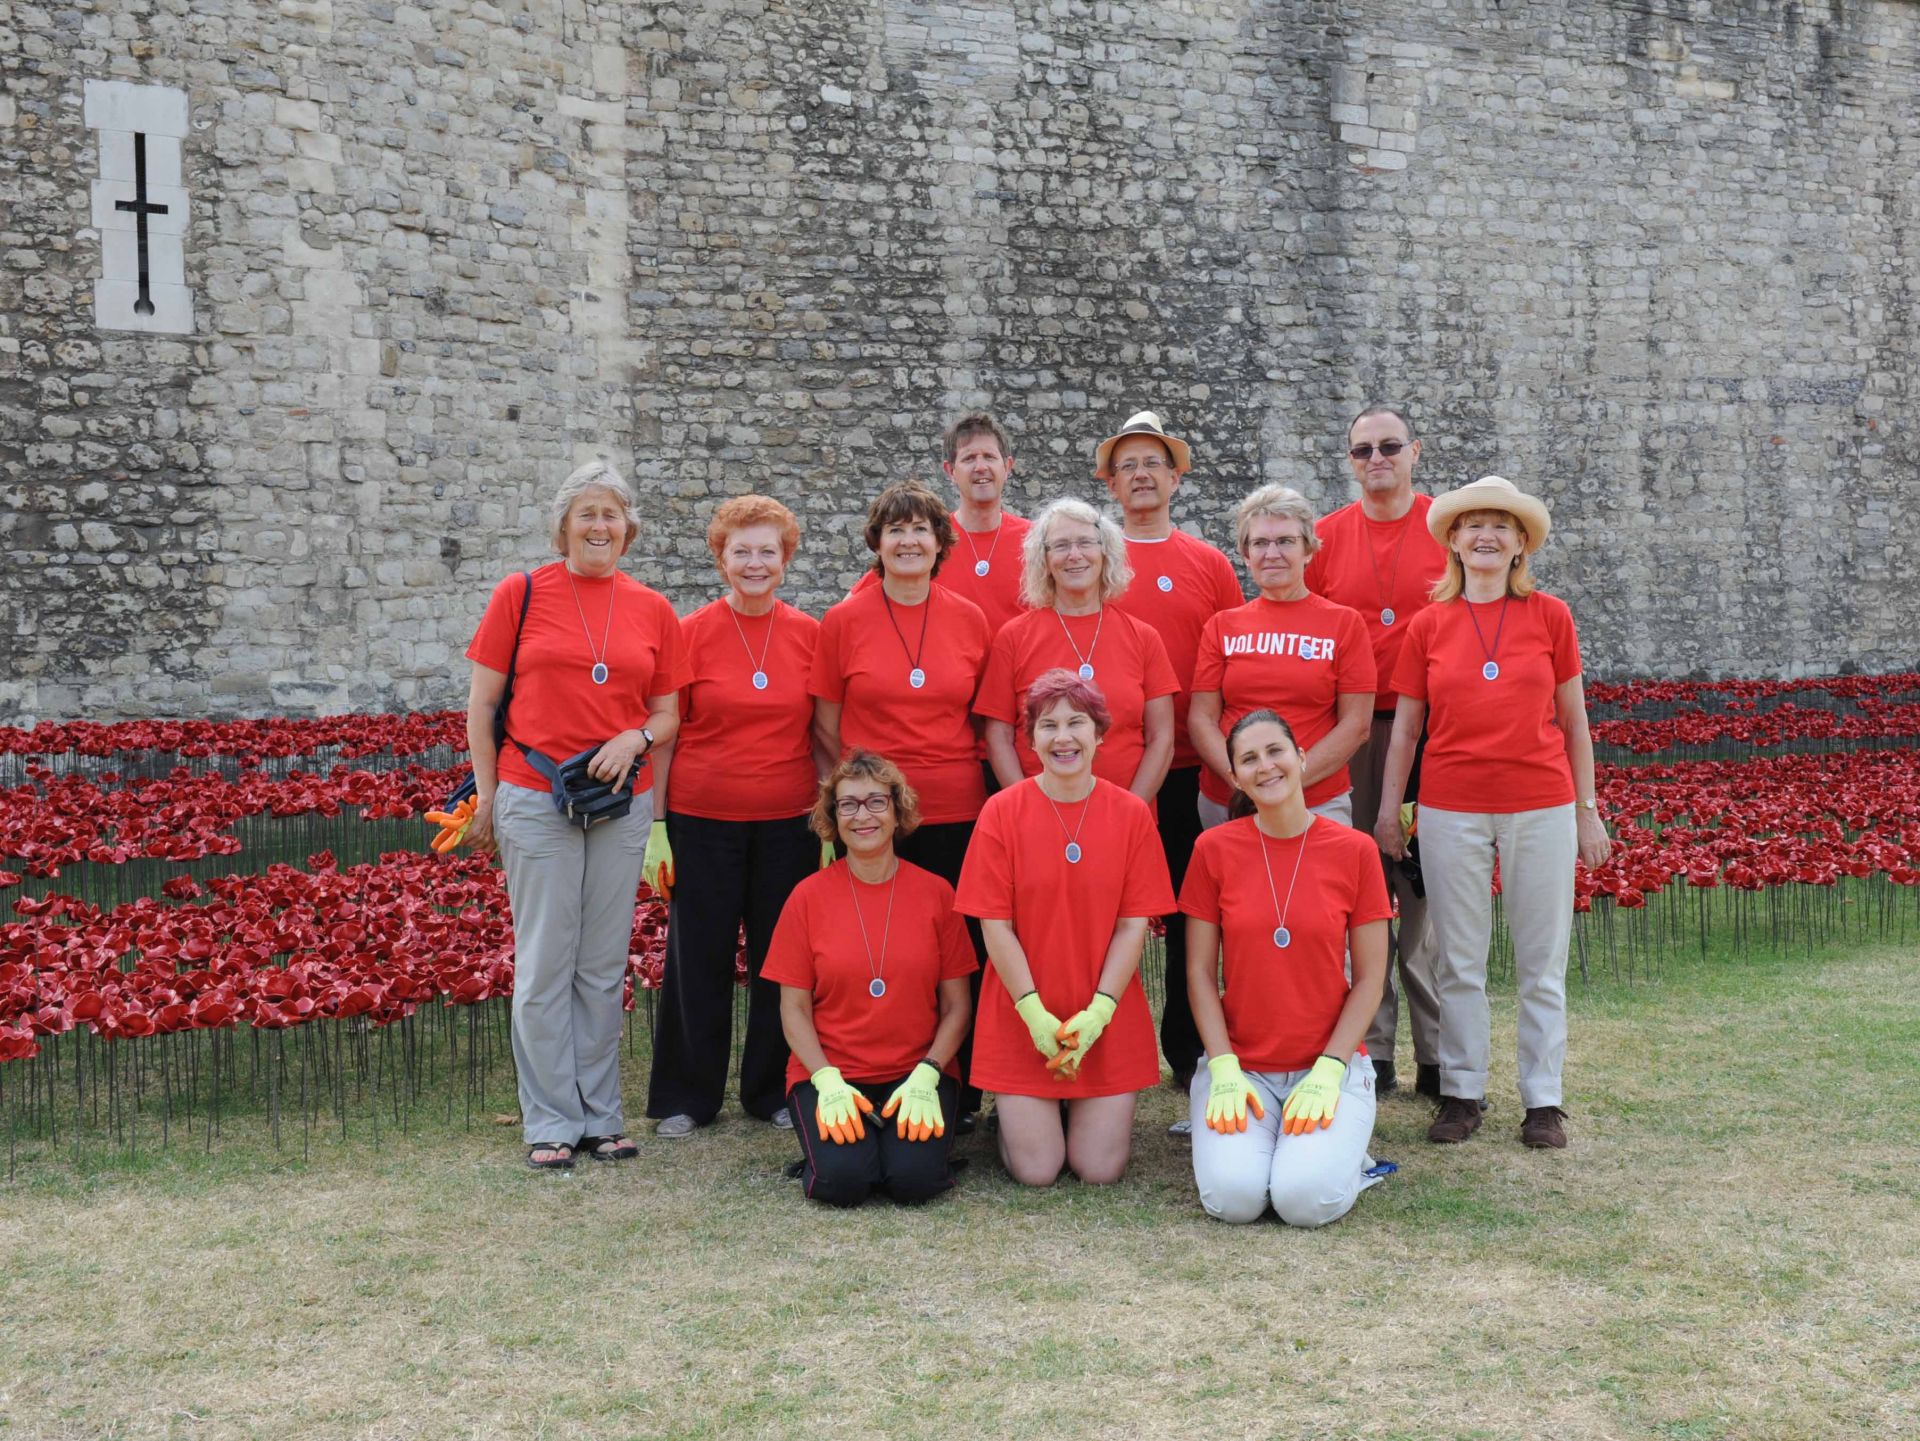 Tower of London: Seas of Red installation